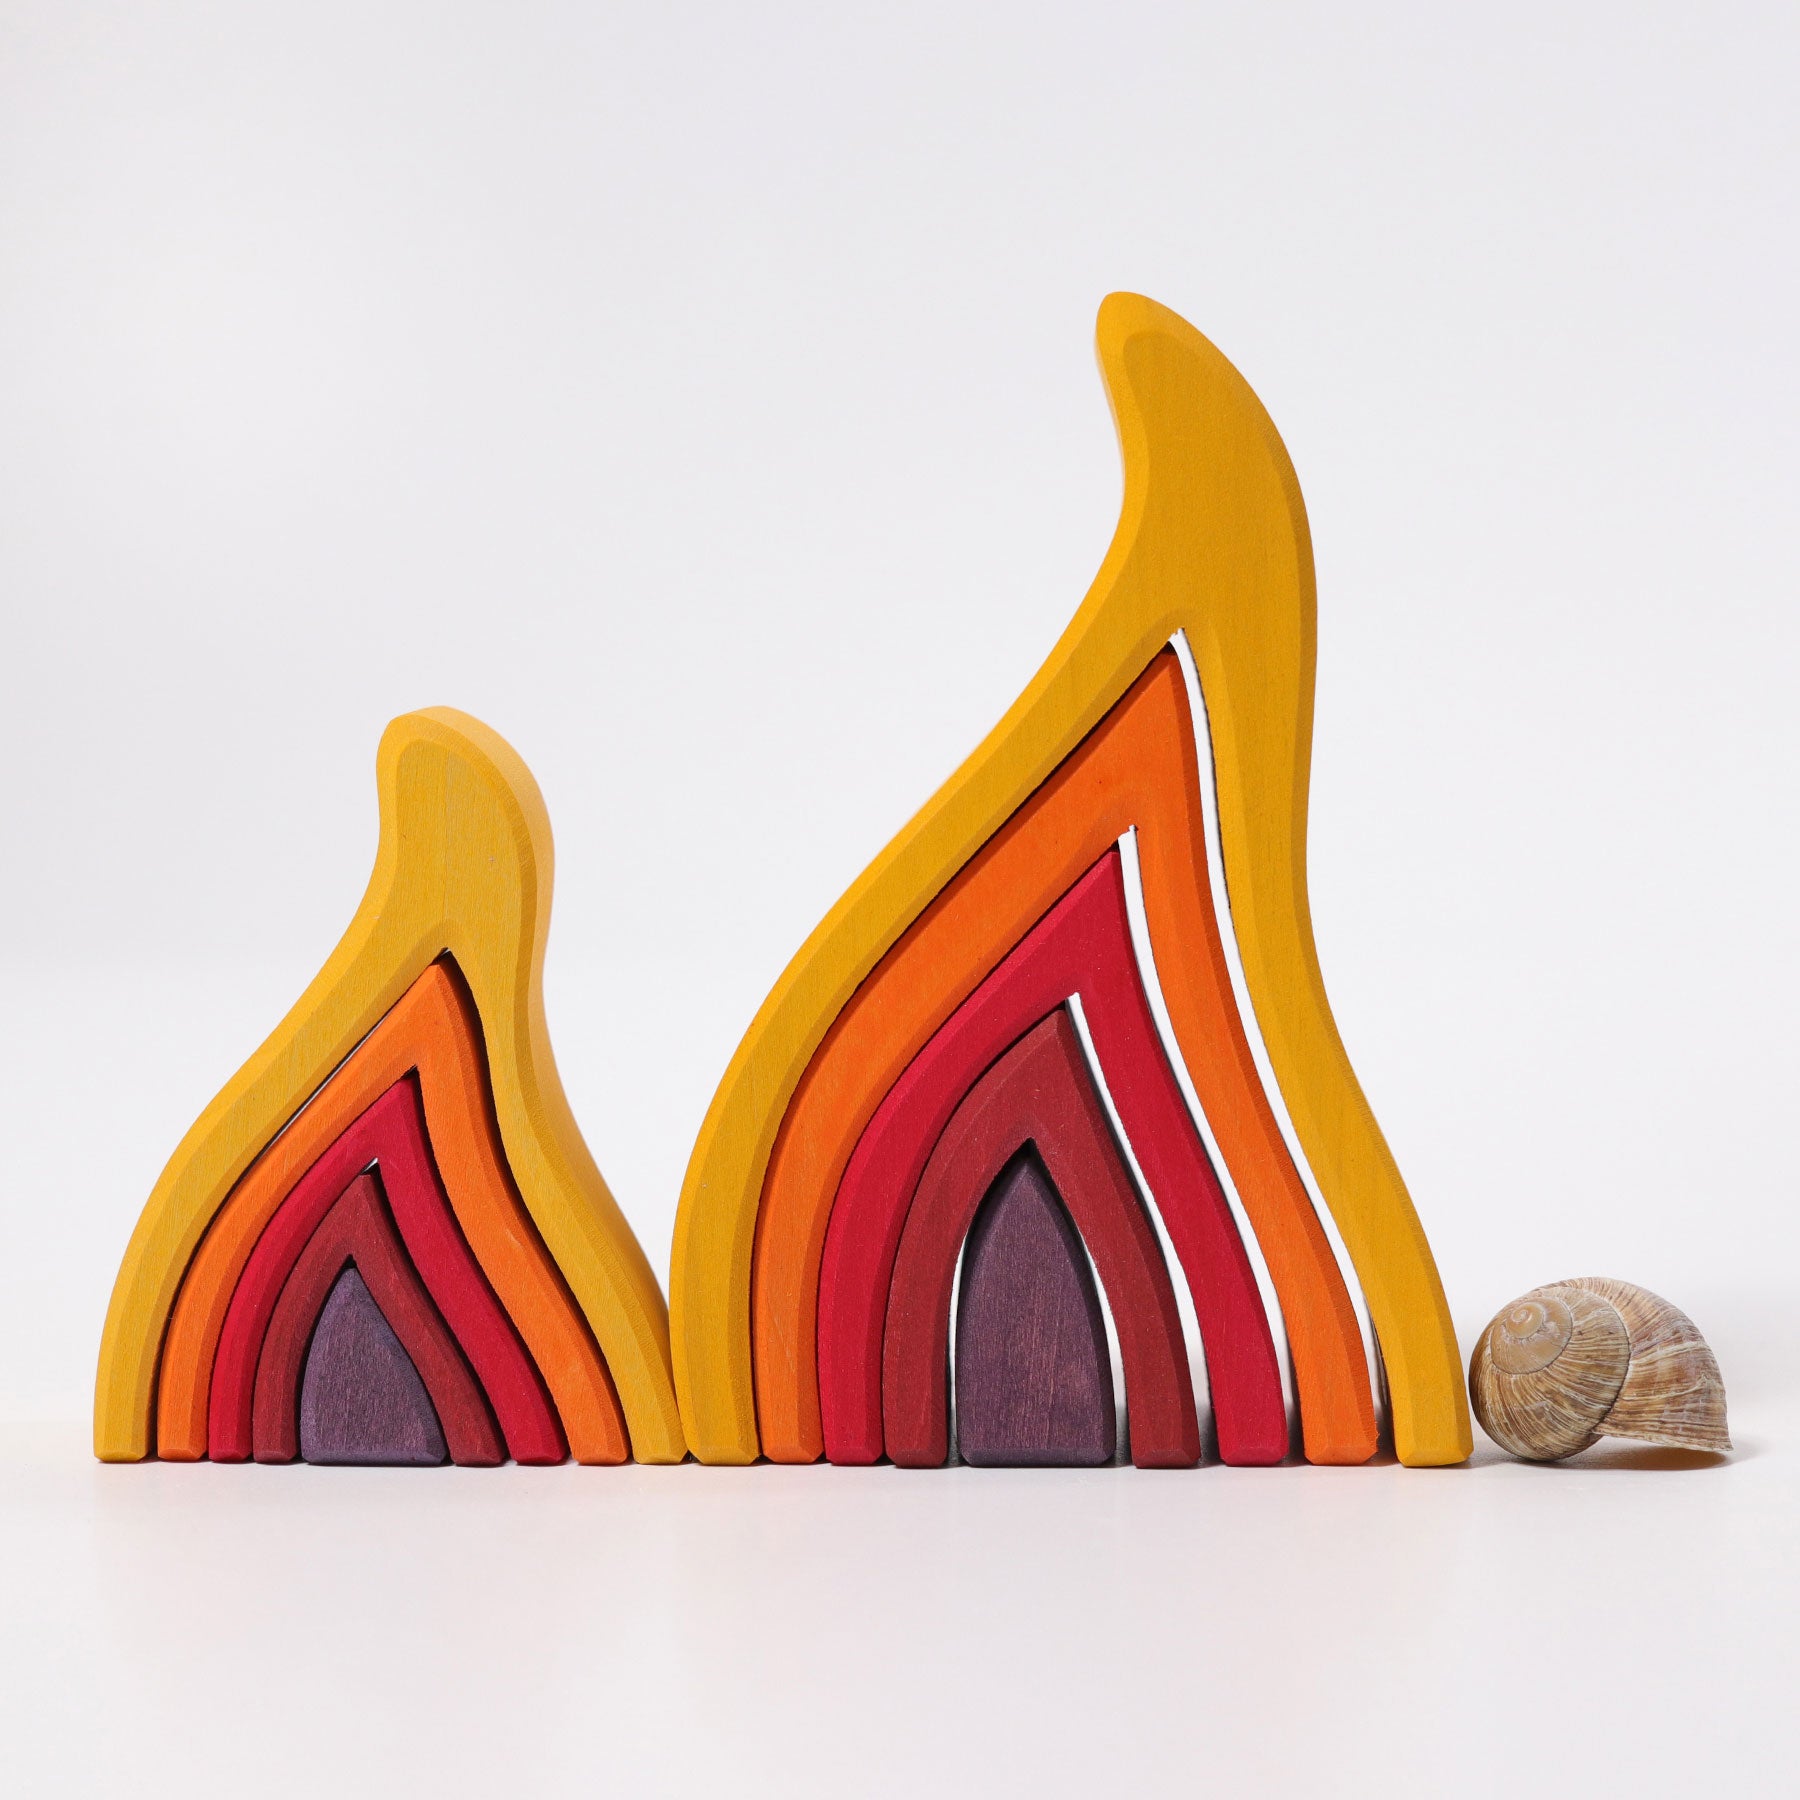 Grimm's Stacking Fire (Small and Large)